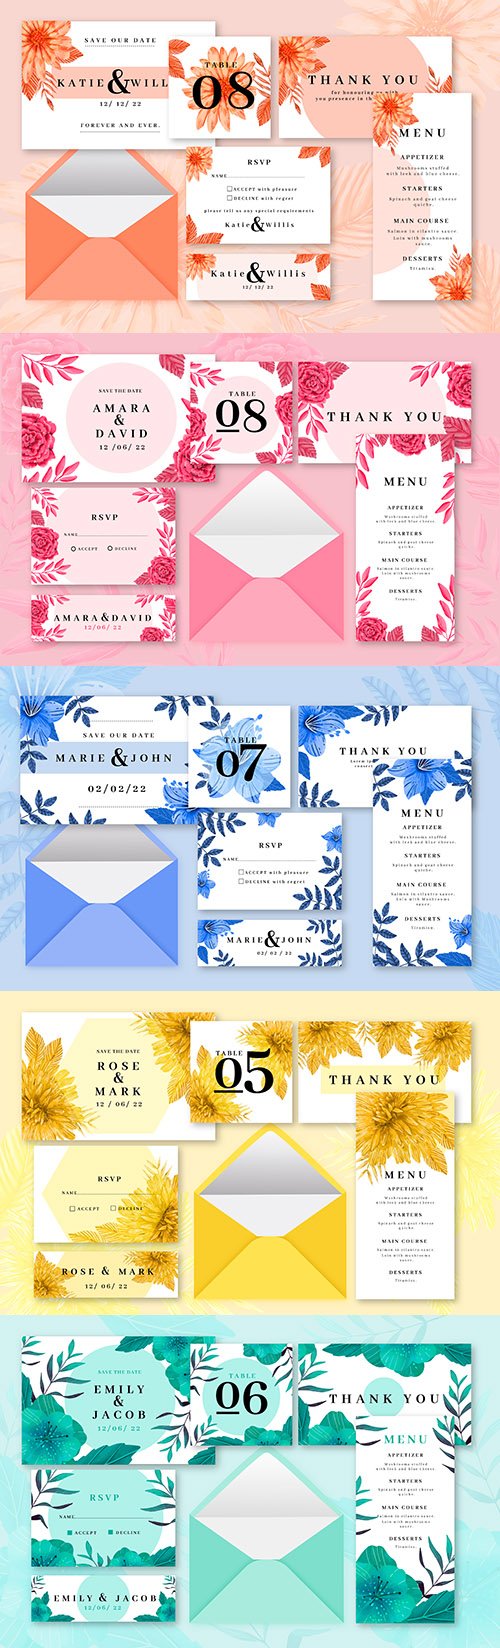 Colored wedding stationery design template